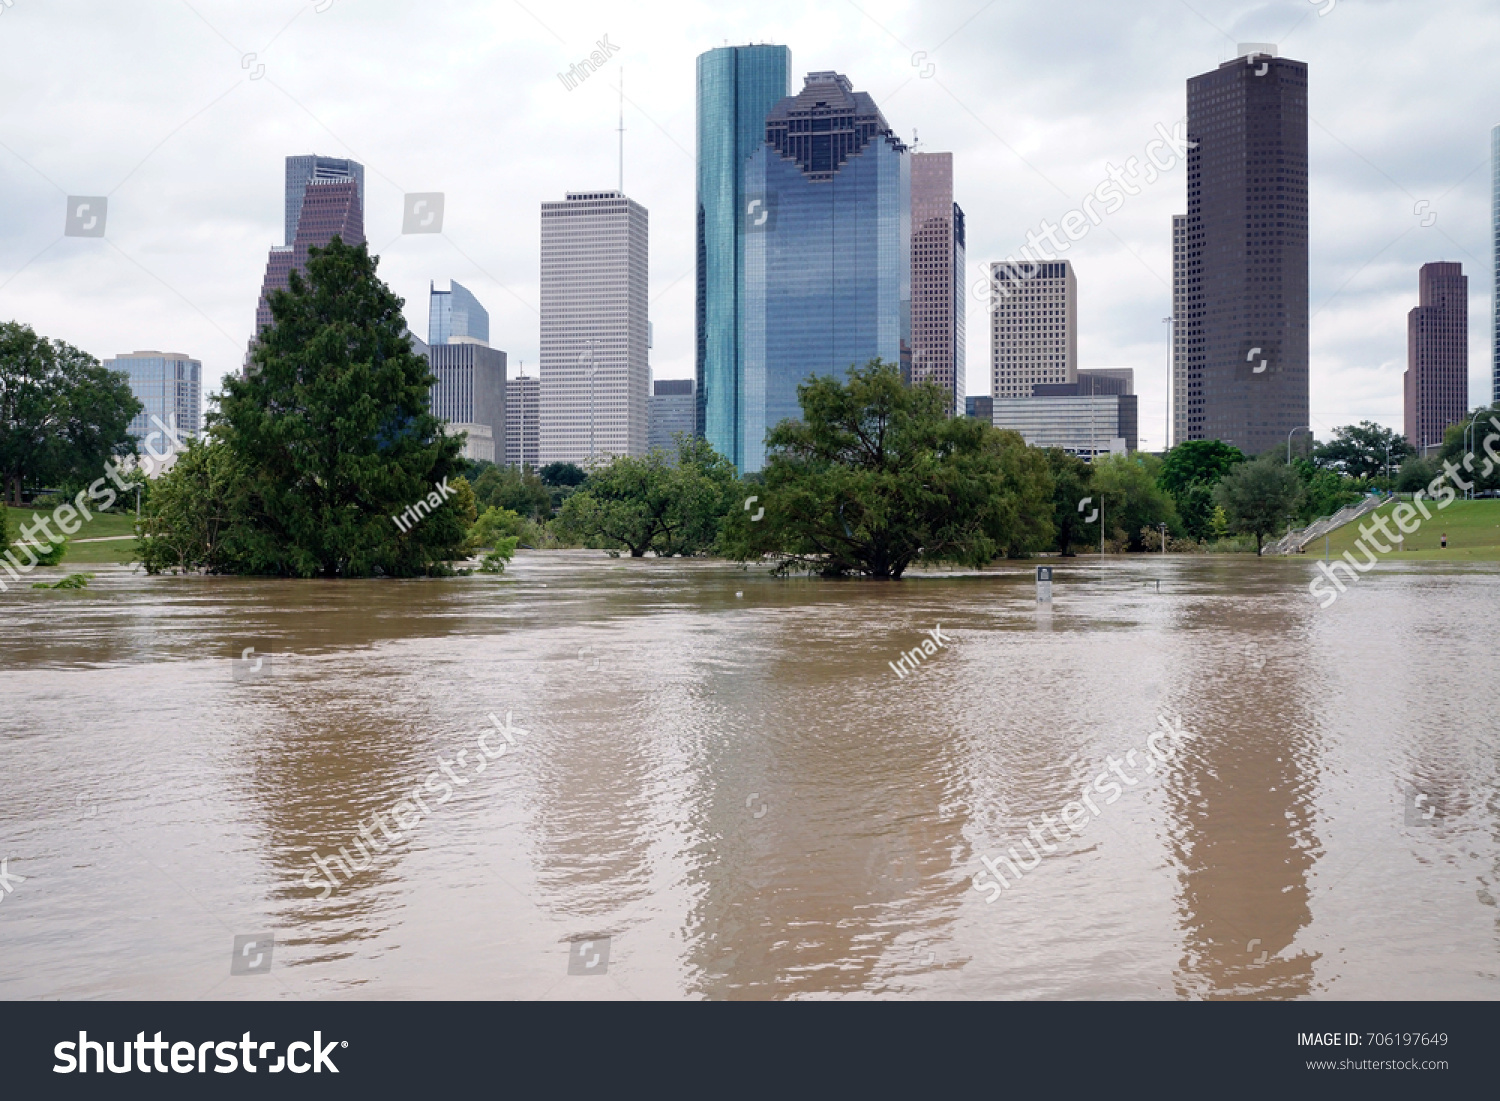 The consequences of the spill Buffalo Bayou River in Houston. Flooded park on Downtown city background. Hurricane Harvey #706197649